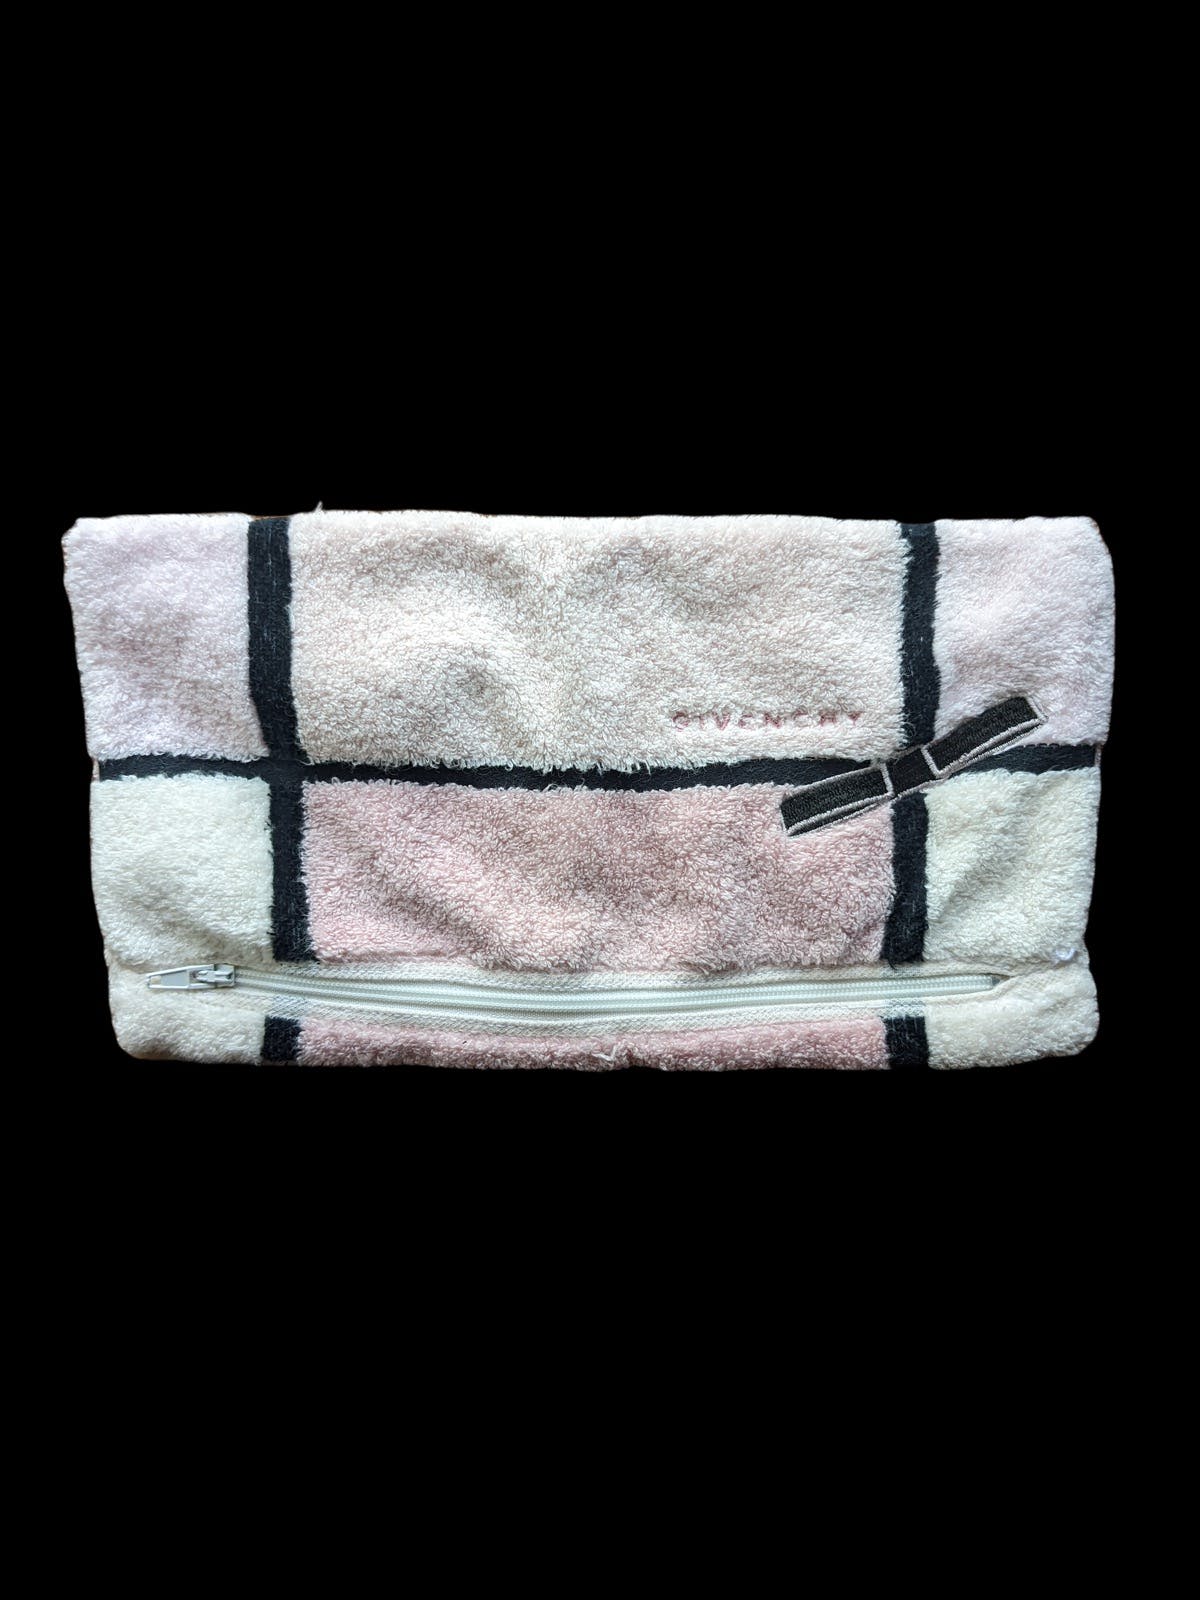 GIVENCHY PINKY TOWEL POUCH BAG - 1